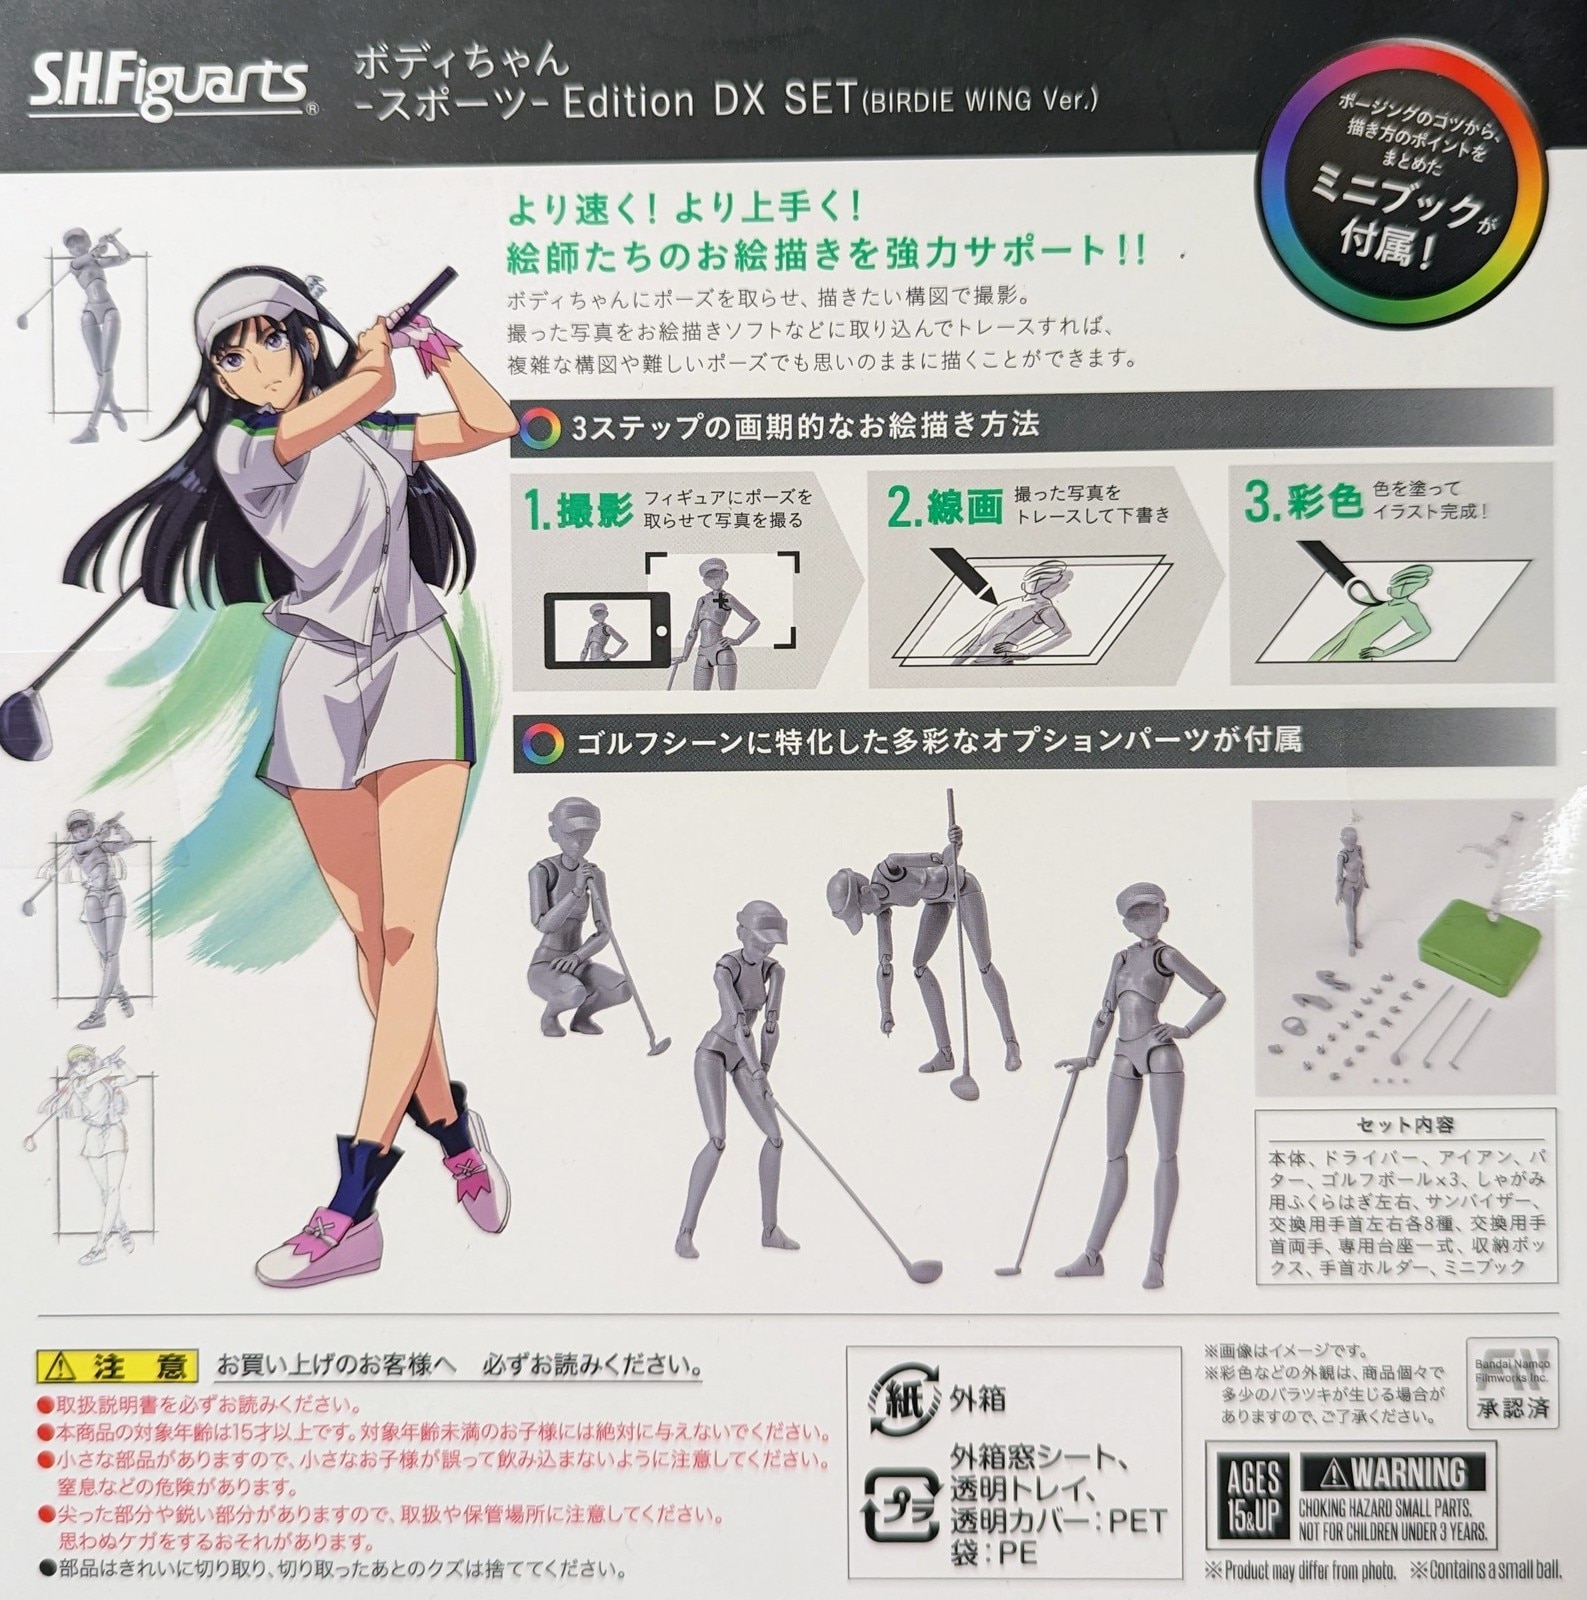 S.H.Figuarts Body-chan Sports Edition DX Set: Birdie Wing Ver